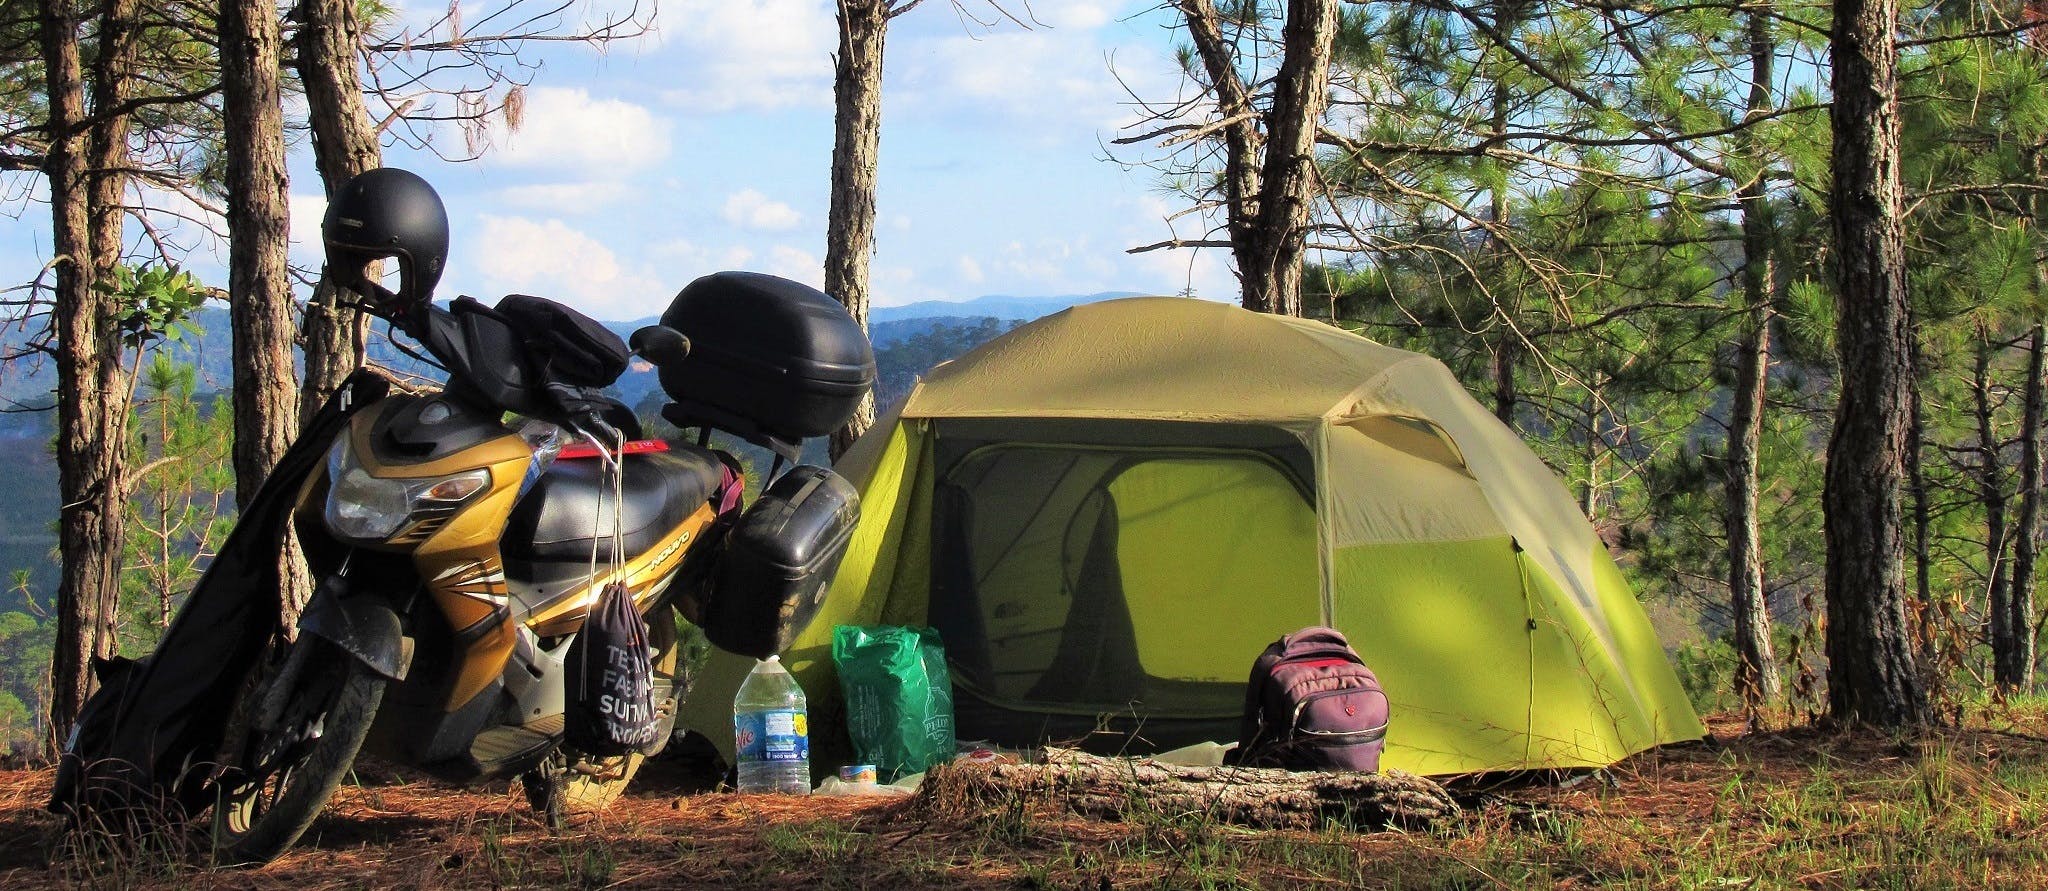 Motocamping in south-central Vietnam in the dry season